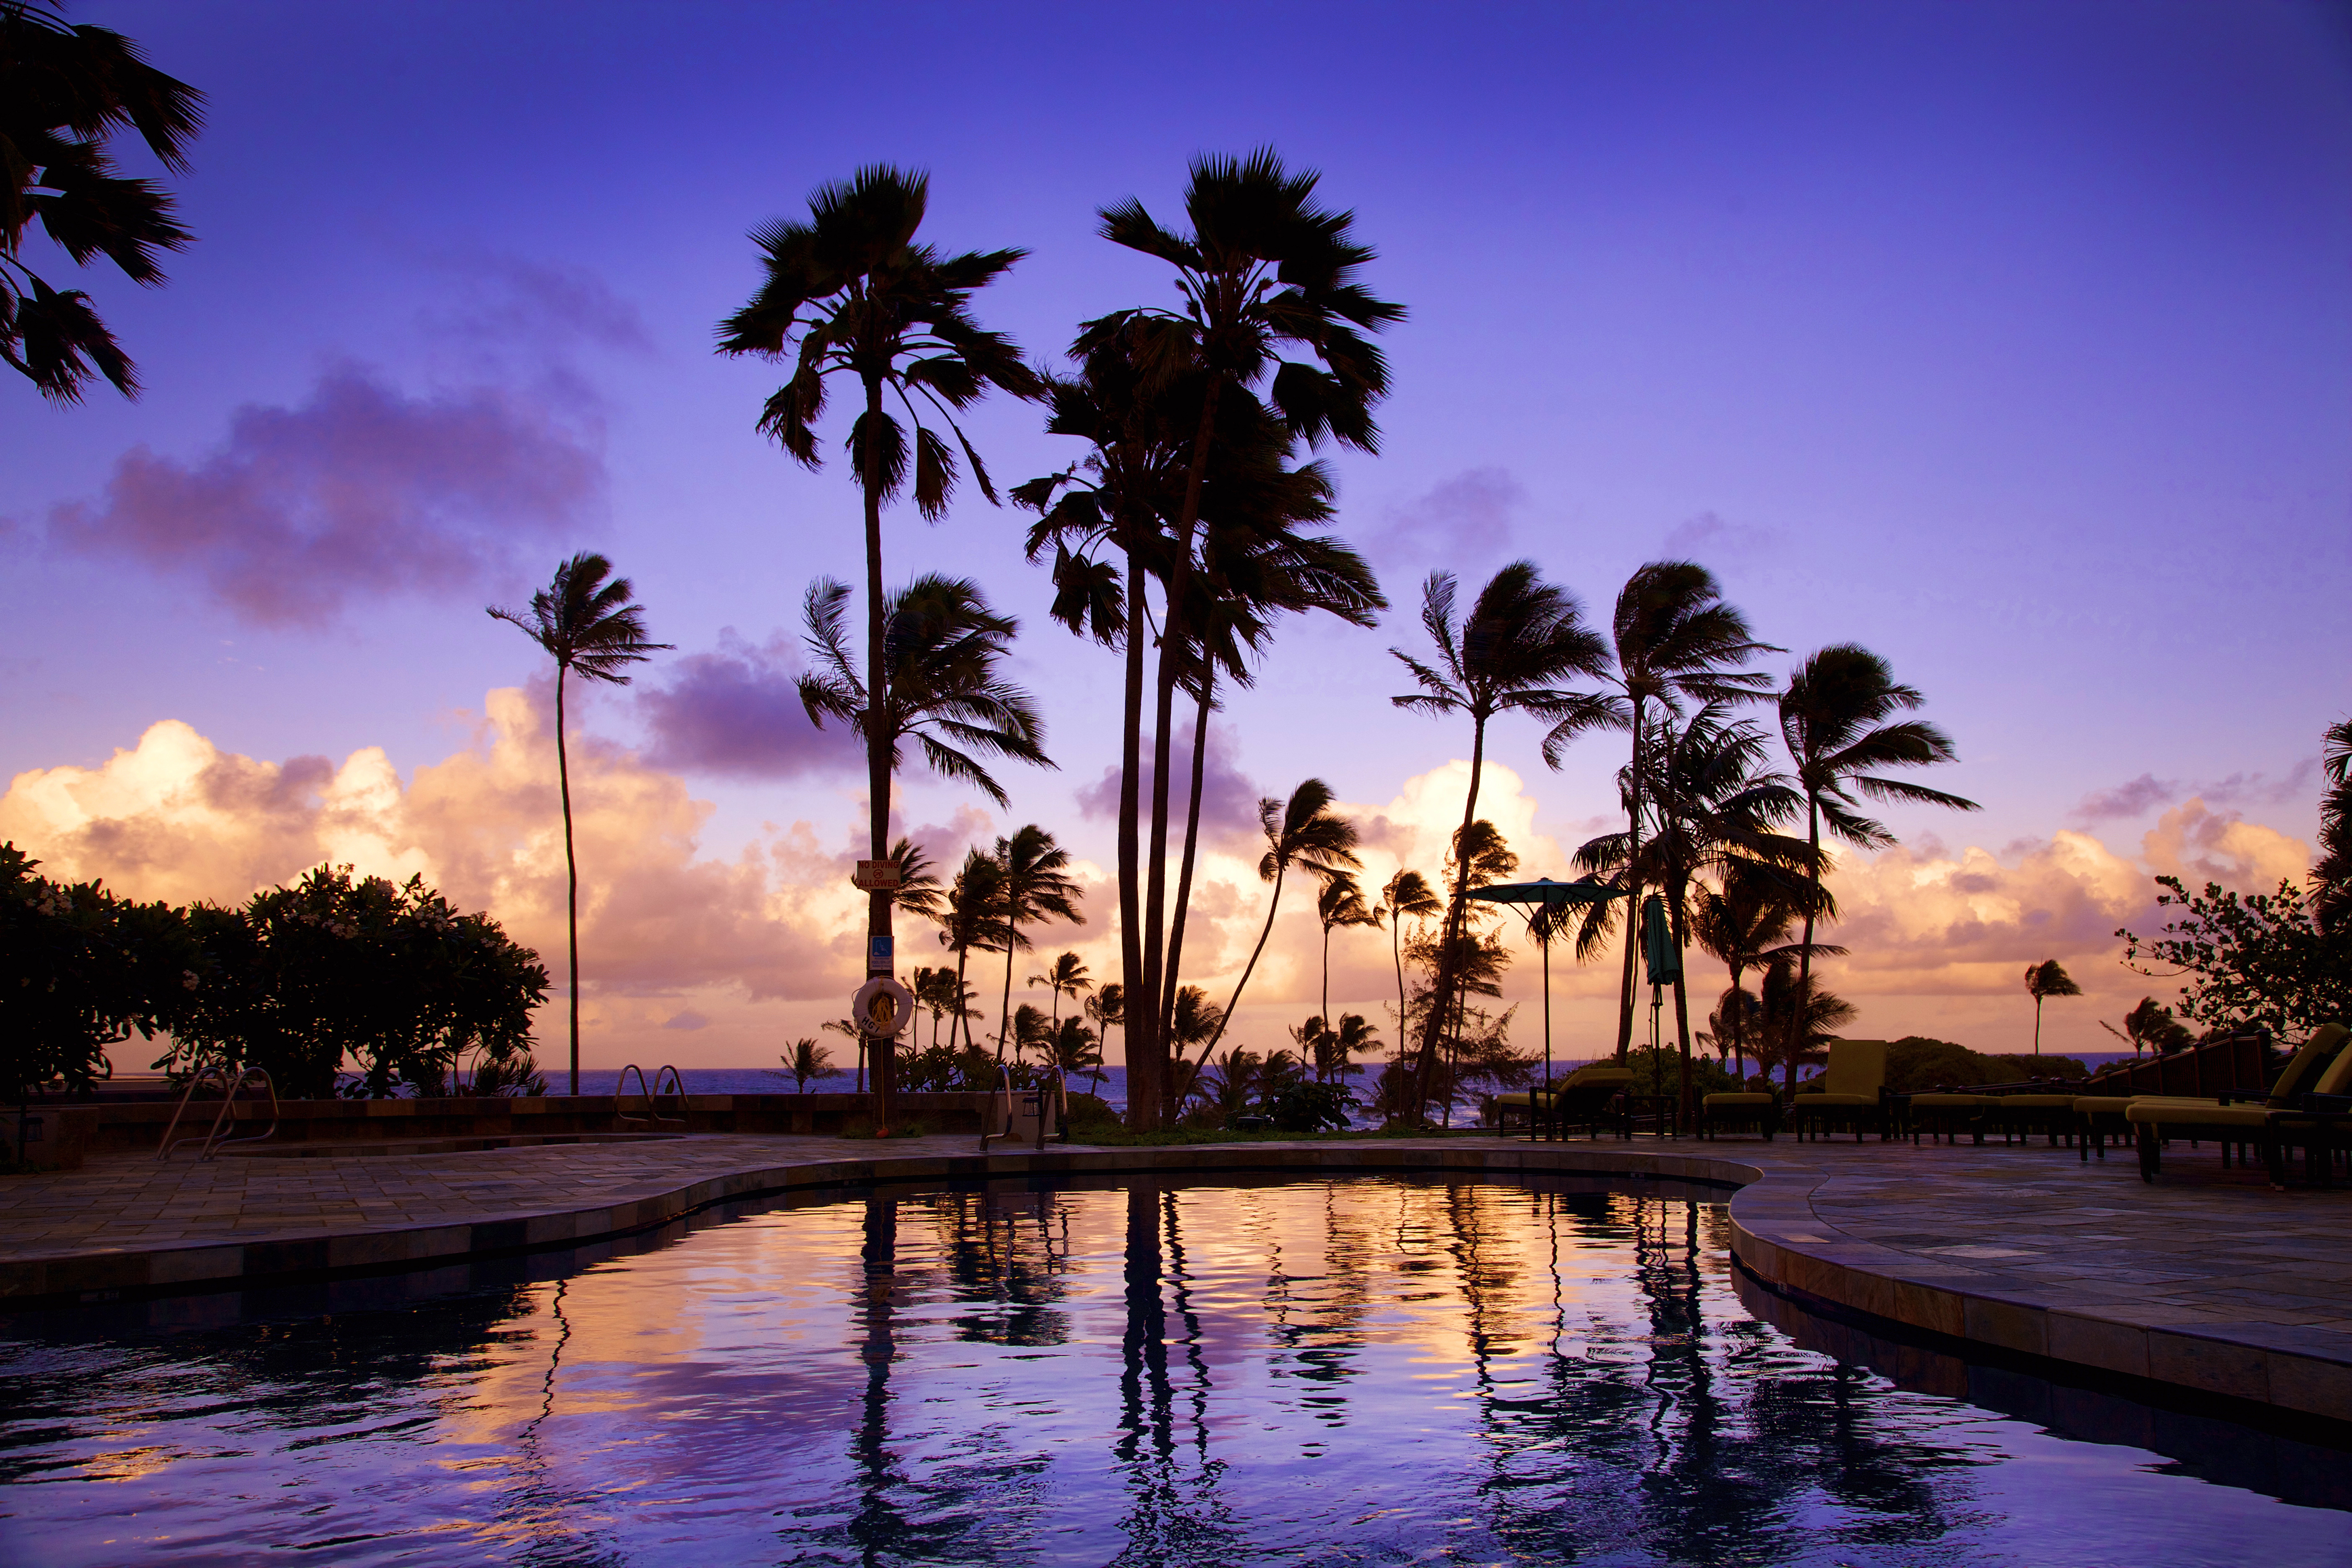 Lounge Chairs, Sun Umbrella, and Outdoor Pool Surrounded by Palm Trees at Sunset